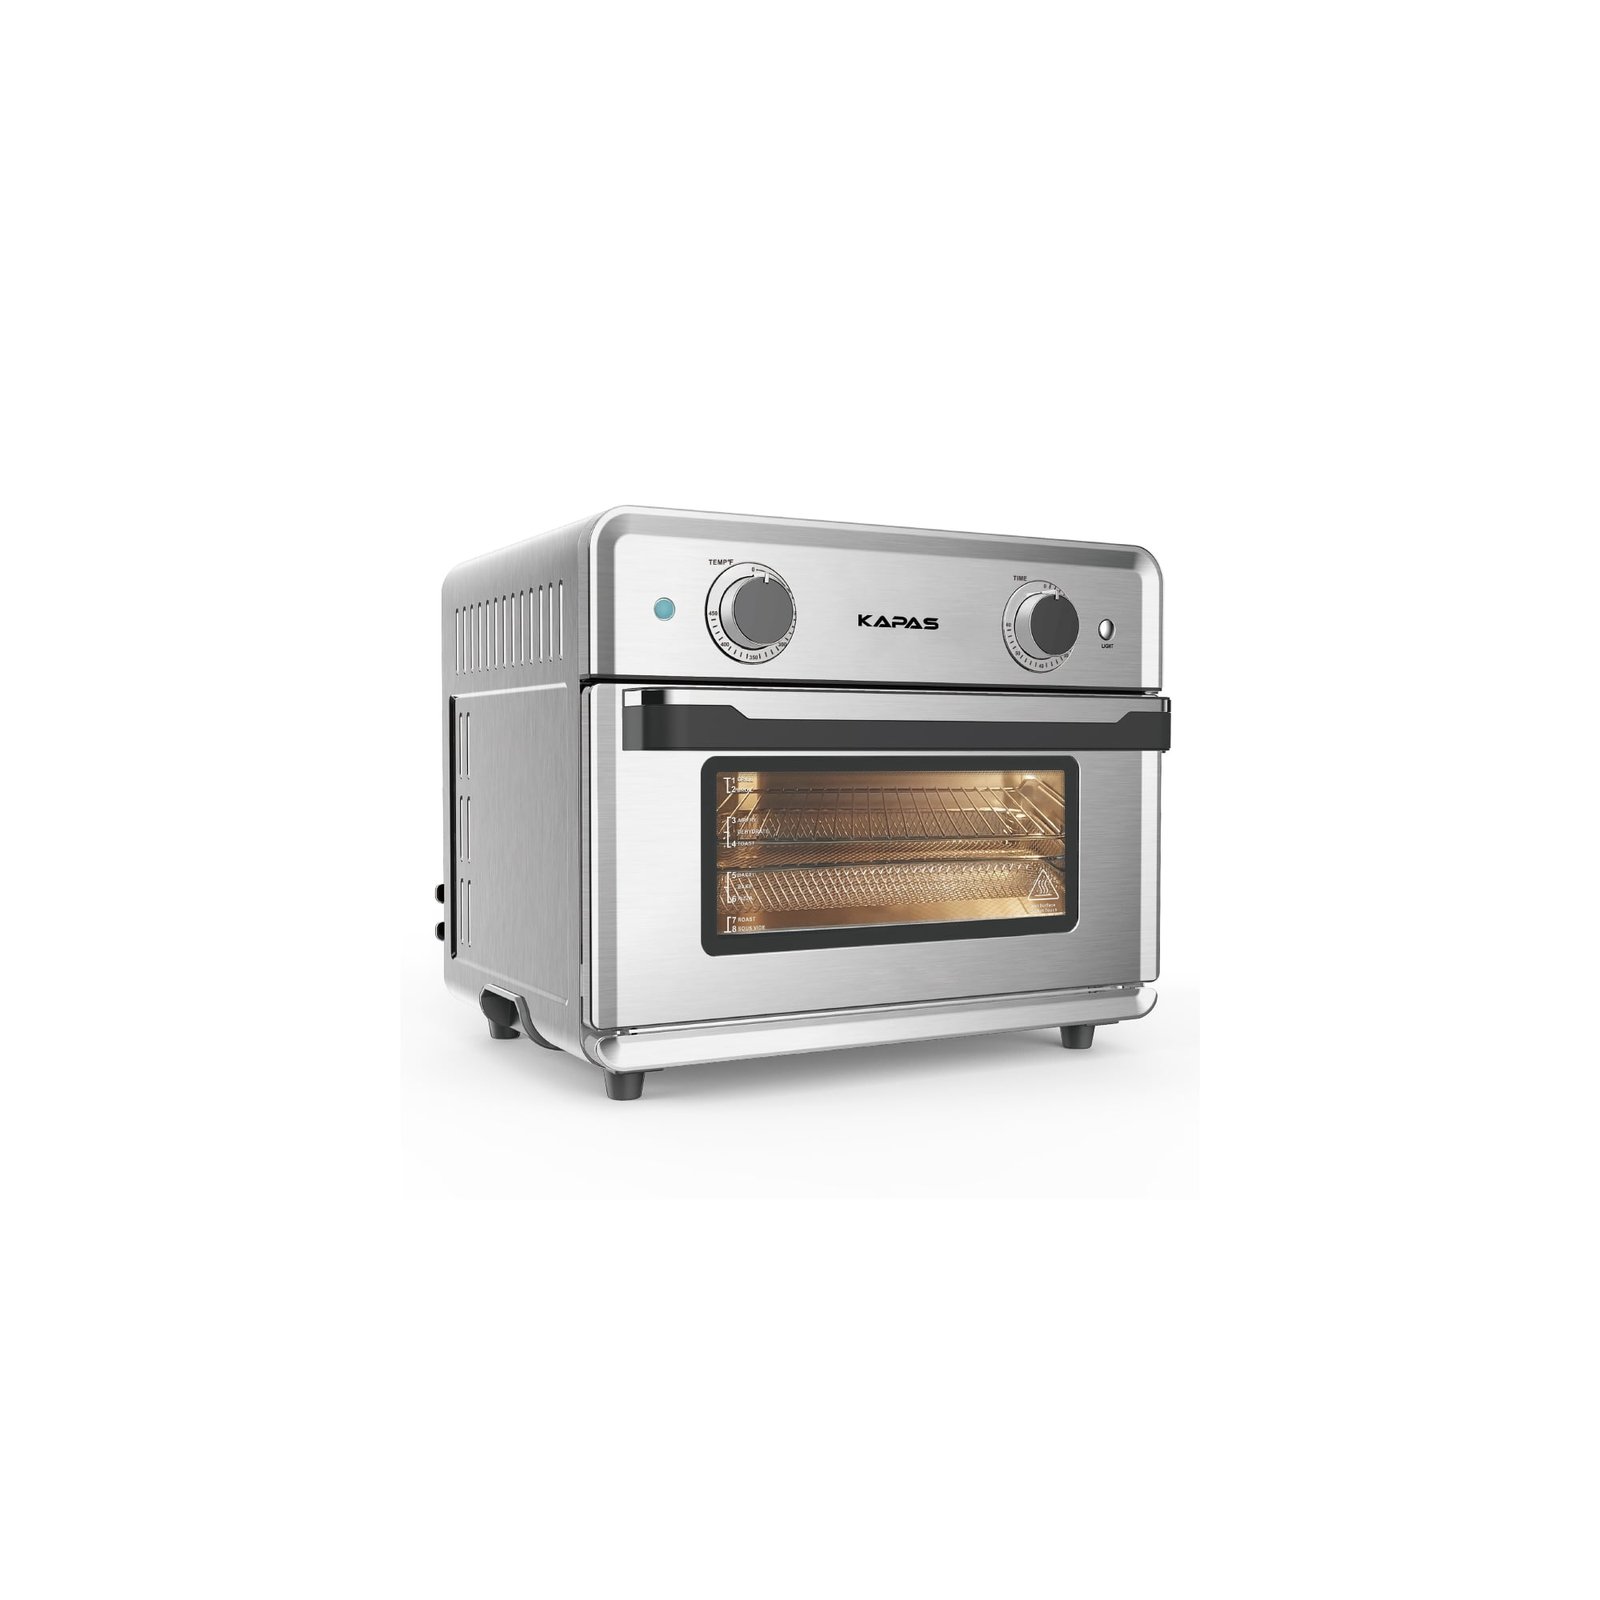 https://themarketdepot.com/wp-content/uploads/2023/01/Smart-Air-Fryer-Oven-1800-W-Stainless-Steel-26.4-QT-Super-Big-Capacity-Toaster-Oven-with-Practical-Accessories-1.jpeg